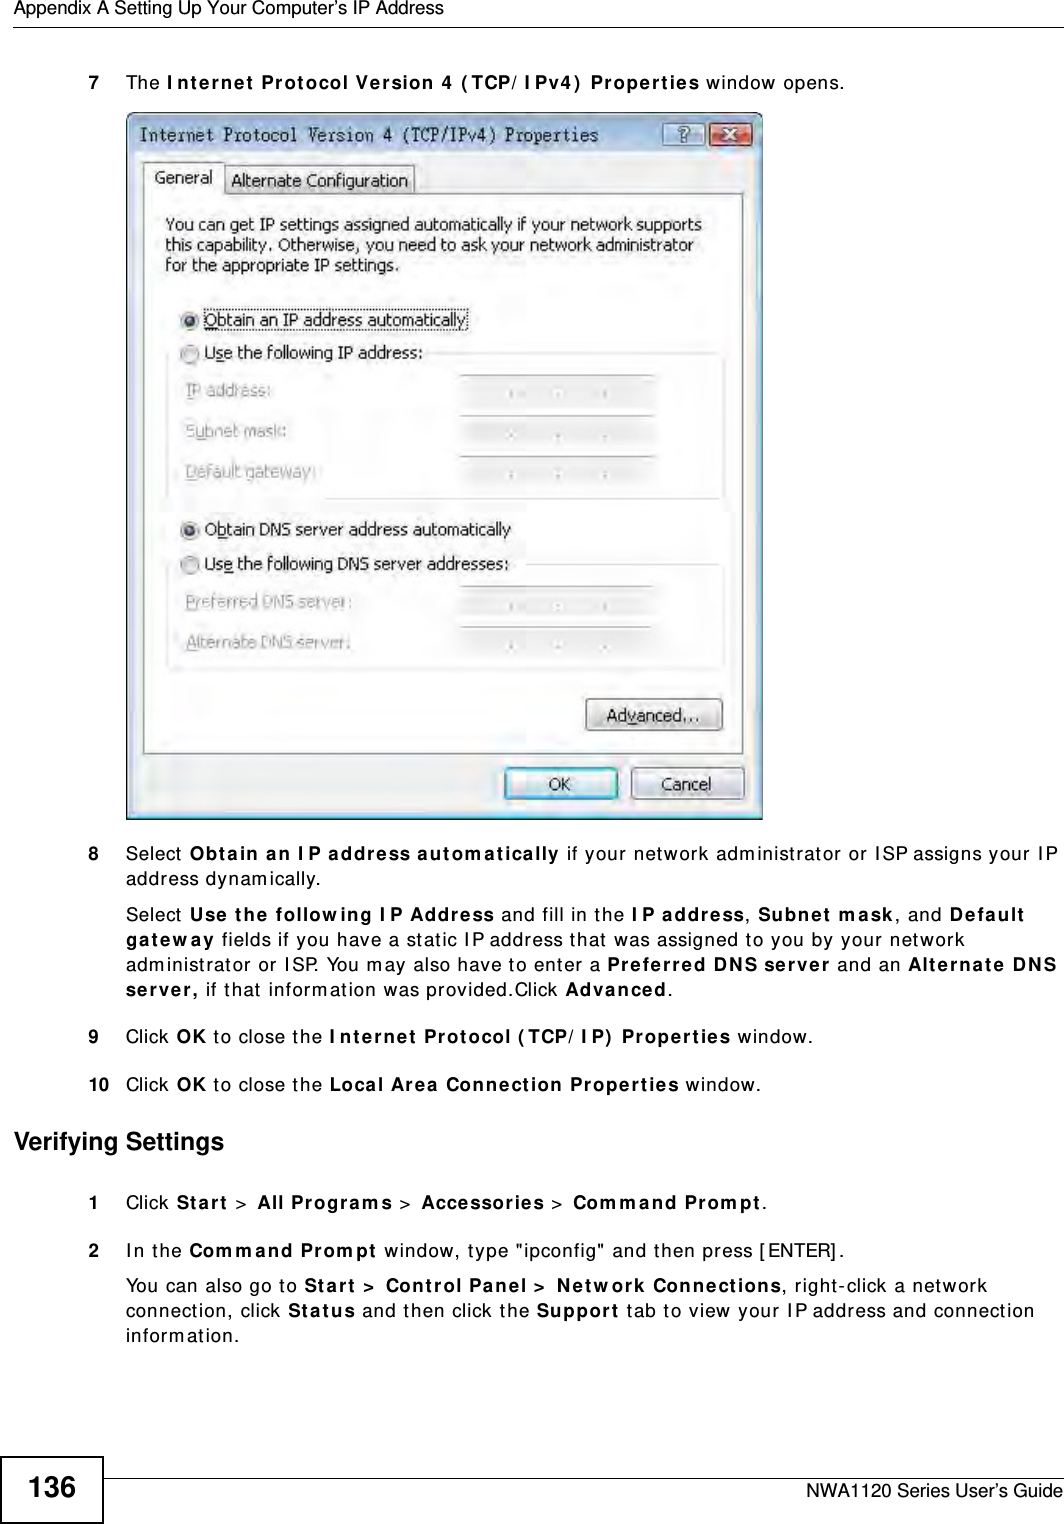 Appendix A Setting Up Your Computer’s IP AddressNWA1120 Series User’s Guide1367The Internet Protocol Version 4 (TCP/IPv4) Properties window opens.8Select Obtain an IP address automatically if your network administrator or ISP assigns your IP address dynamically.Select Use the following IP Address and fill in the IP address, Subnet mask, and Default gateway fields if you have a static IP address that was assigned to you by your network administrator or ISP. You may also have to enter a Preferred DNS server and an Alternate DNS server, if that information was provided.Click Advanced.9Click OK to close the Internet Protocol (TCP/IP) Properties window.10 Click OK to close the Local Area Connection Properties window.Verifying Settings1Click Start &gt; All Programs &gt; Accessories &gt; Command Prompt.2In the Command Prompt window, type &quot;ipconfig&quot; and then press [ENTER]. You can also go to Start &gt; Control Panel &gt; Network Connections, right-click a network connection, click Status and then click the Support tab to view your IP address and connection information.